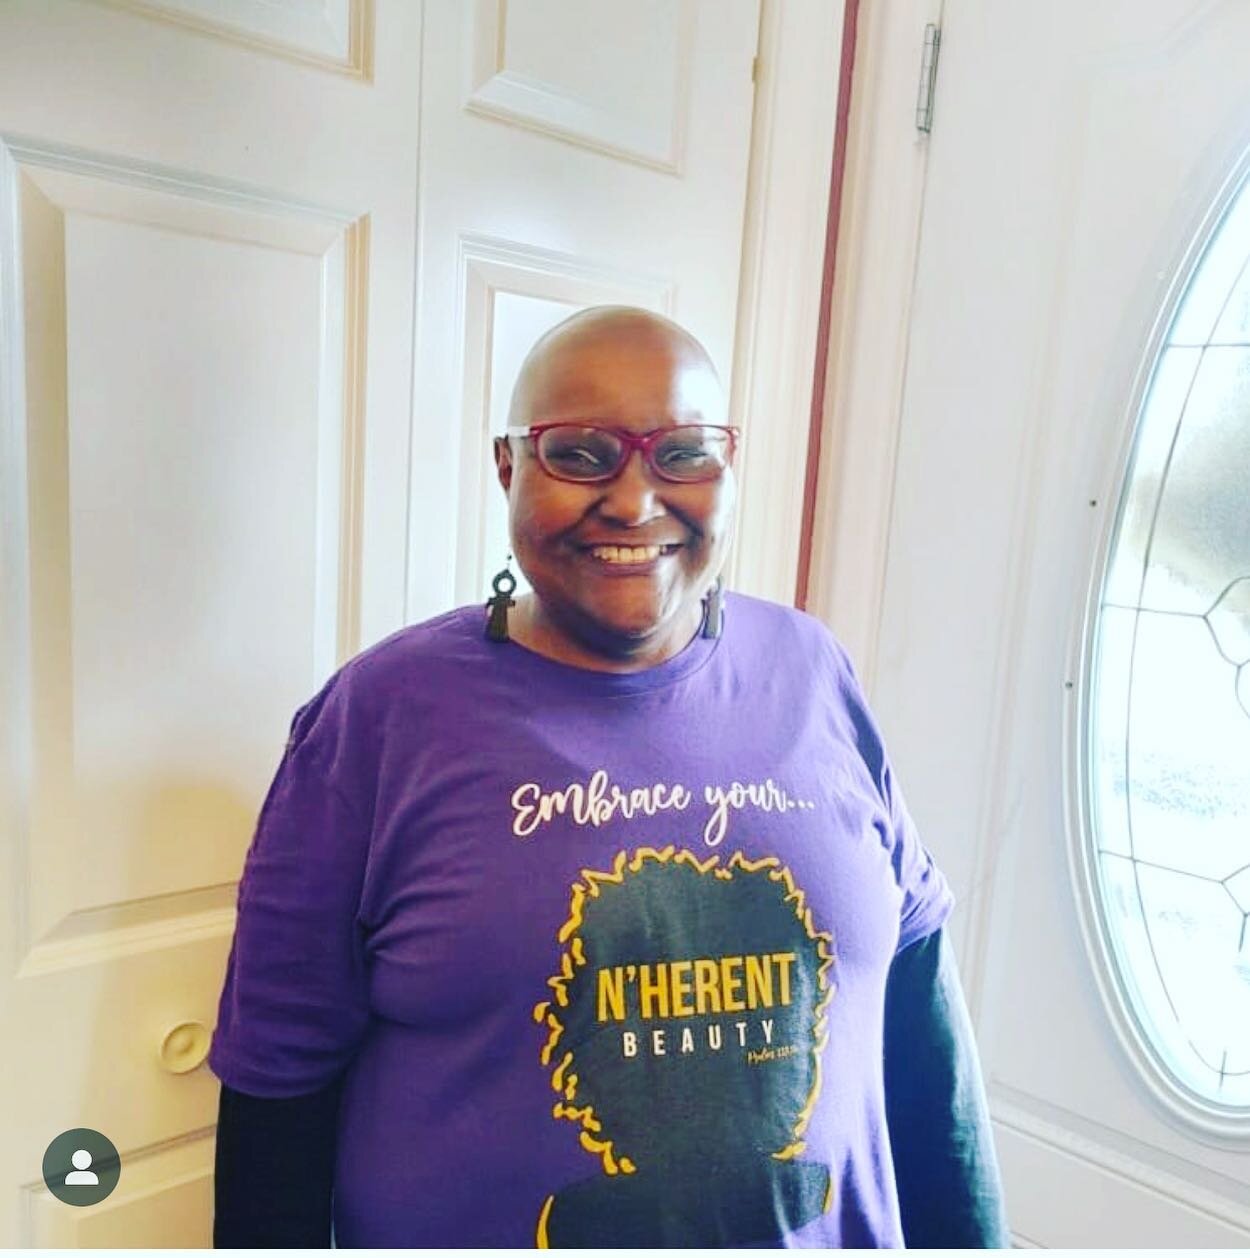 N&rsquo;herent Brauty Apparel would like to send out a special Birthday  shout to @rhondasmith808 She kicked cancer&rsquo;s butt about 1 year ago. 💪🏾 She&rsquo;s strong she&rsquo;s beautiful. Celebrate your Nherent Beauty !!🎉🎉@nherentbeauty